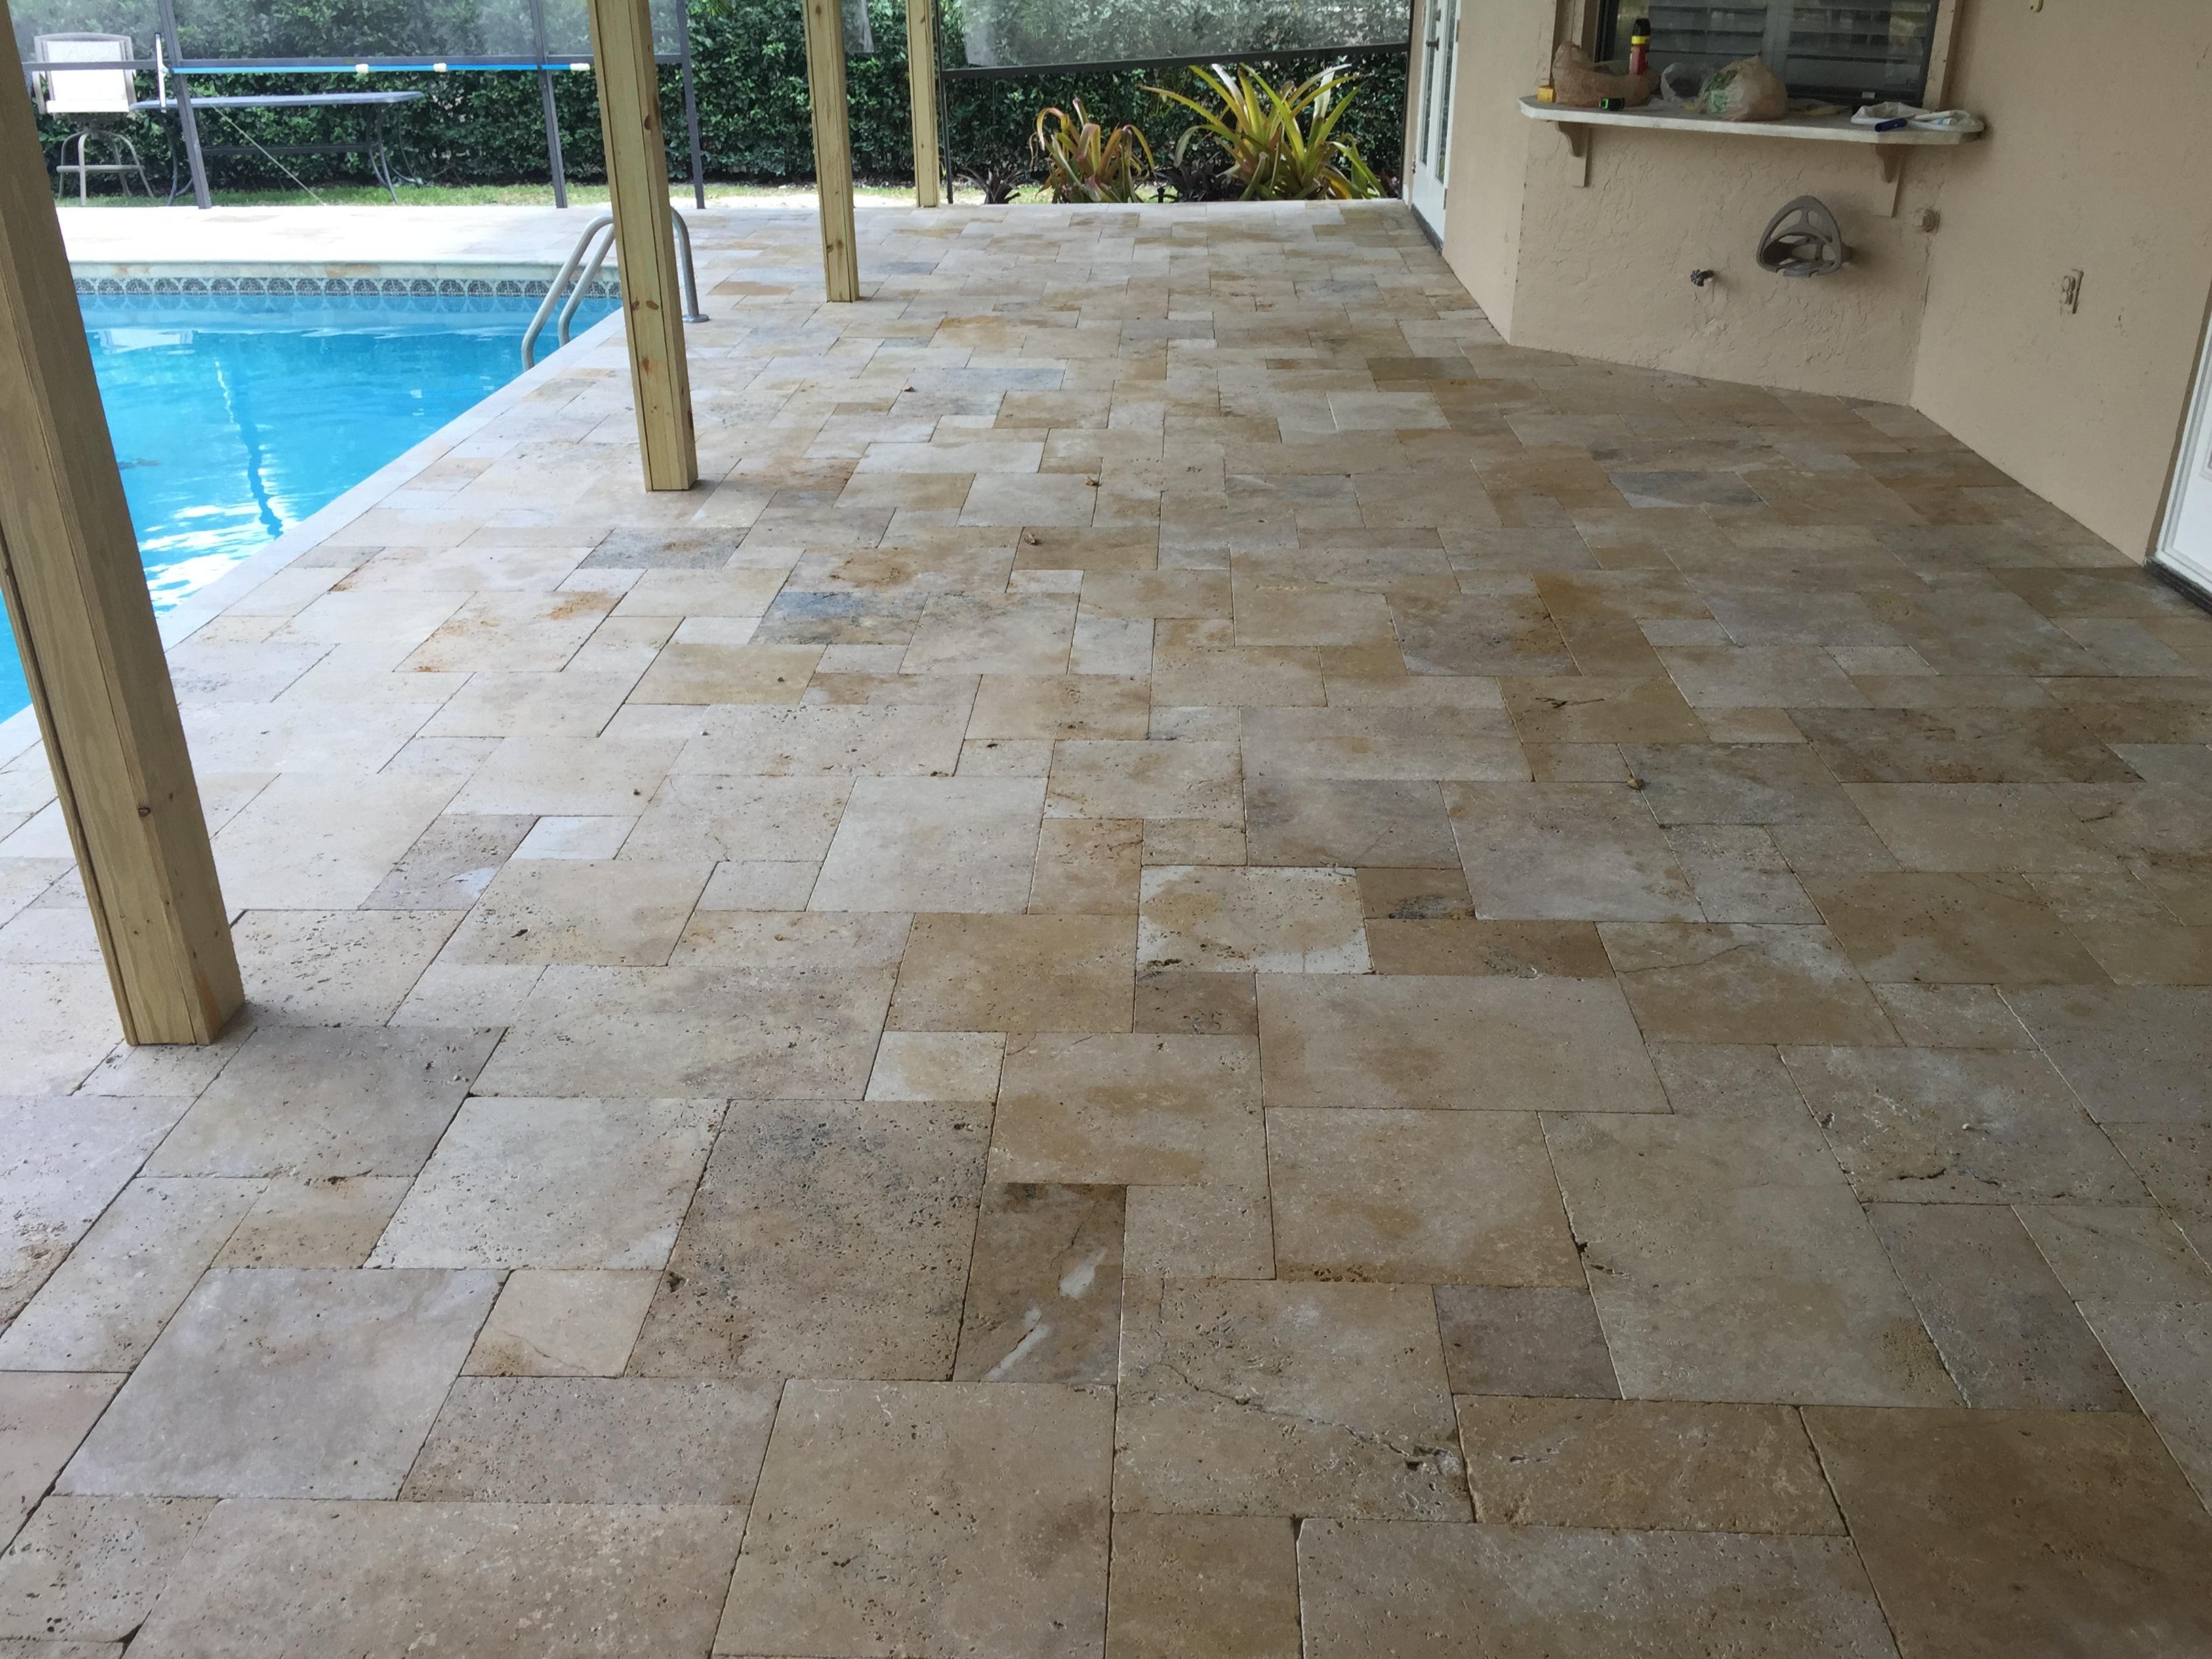 TRAVERTINE COUNTRY FRENCH PATTERN INSTALLED IN A HOUSE POOL RENOVATION